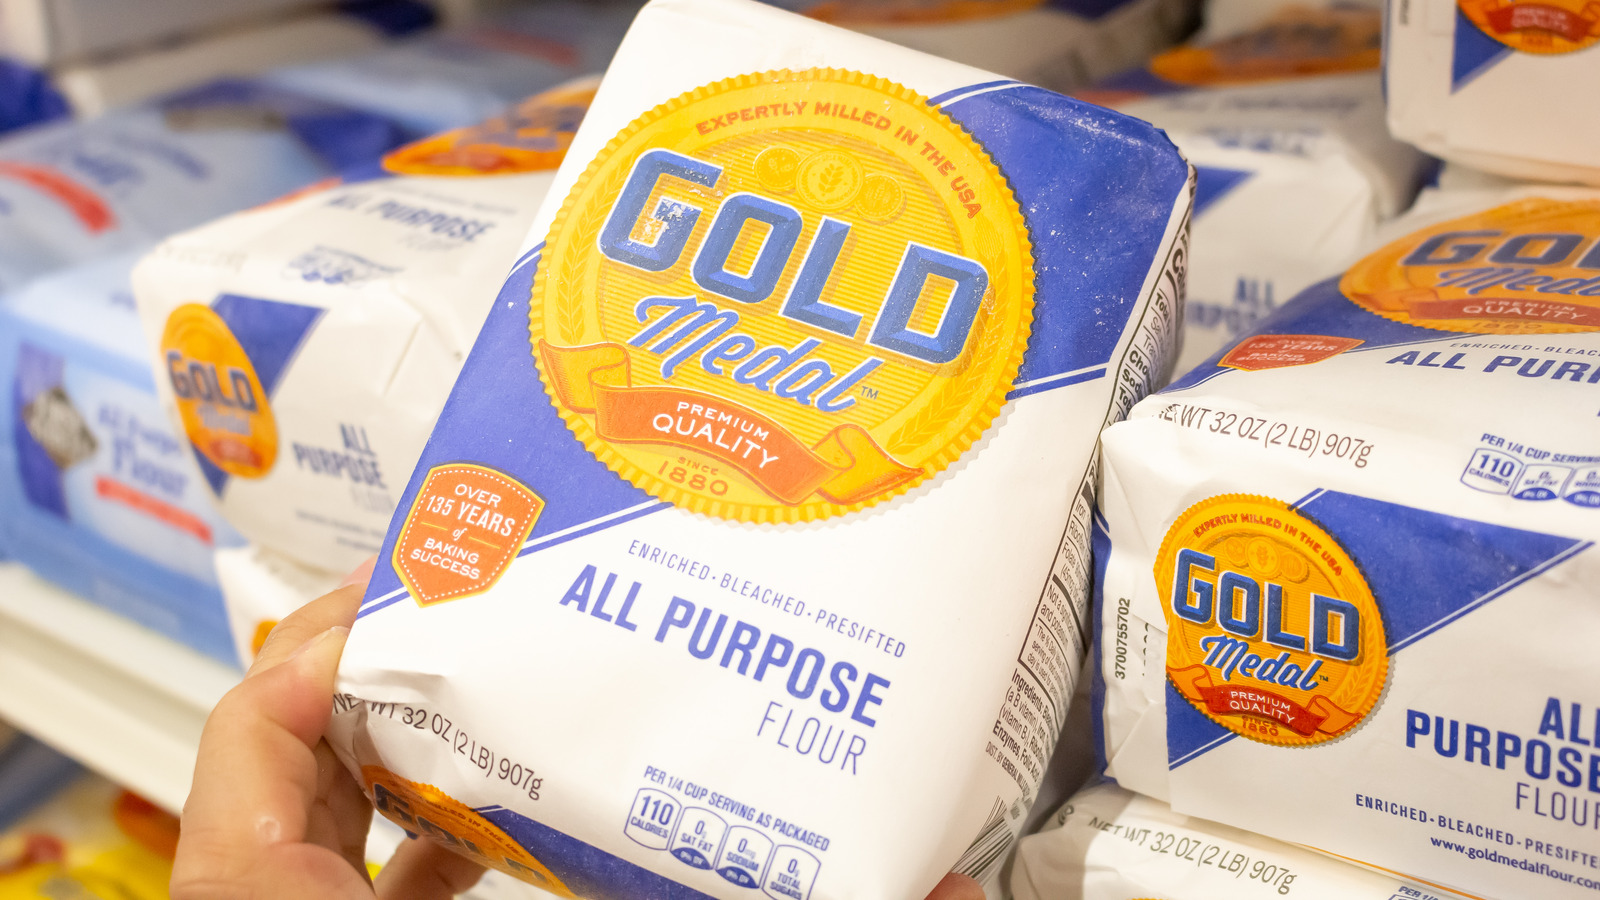 General Mills Declares Nationwide Flour Recall After Salmonella Discovery